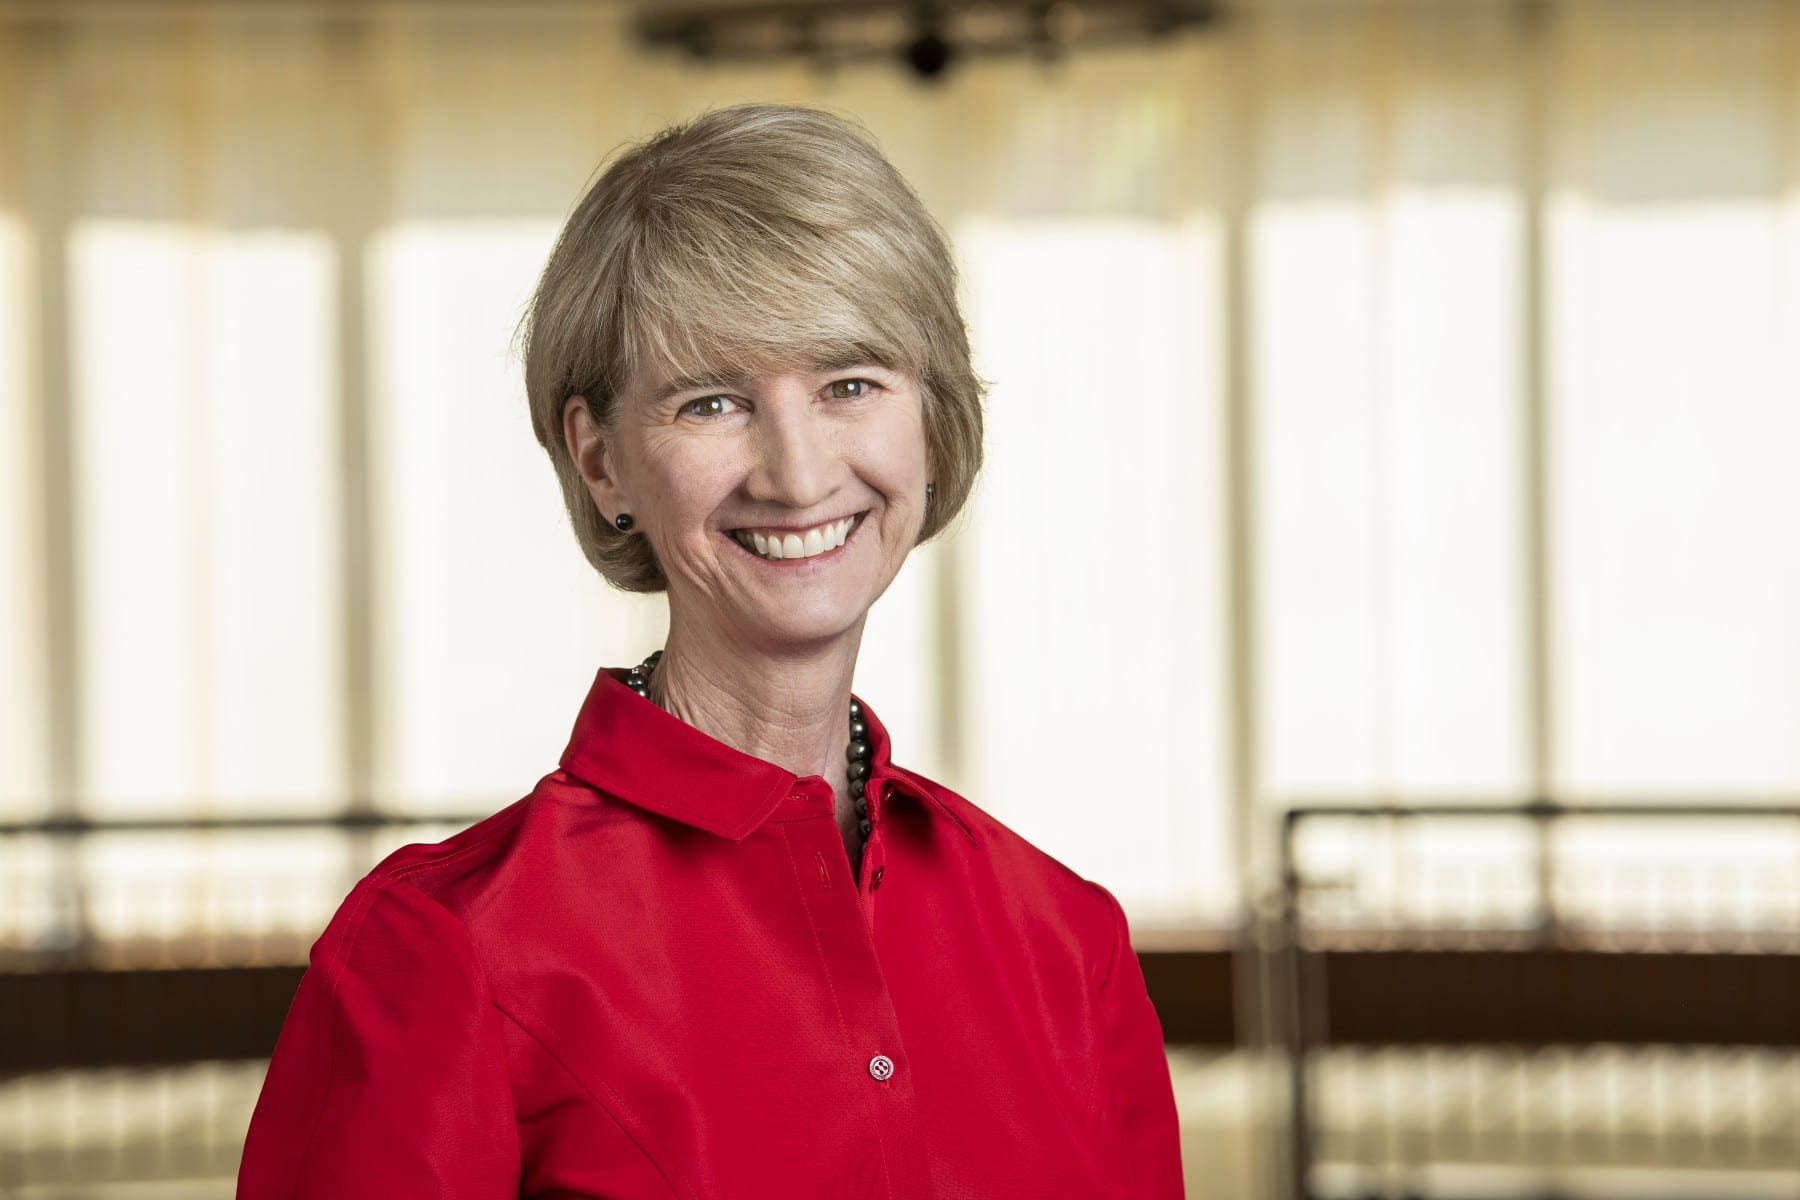 Kristina M. Johnson is stepping down from her position as chancellor of the State University of New York to become the next president of Ohio State University. | Credit: Courtesy of Ohio State